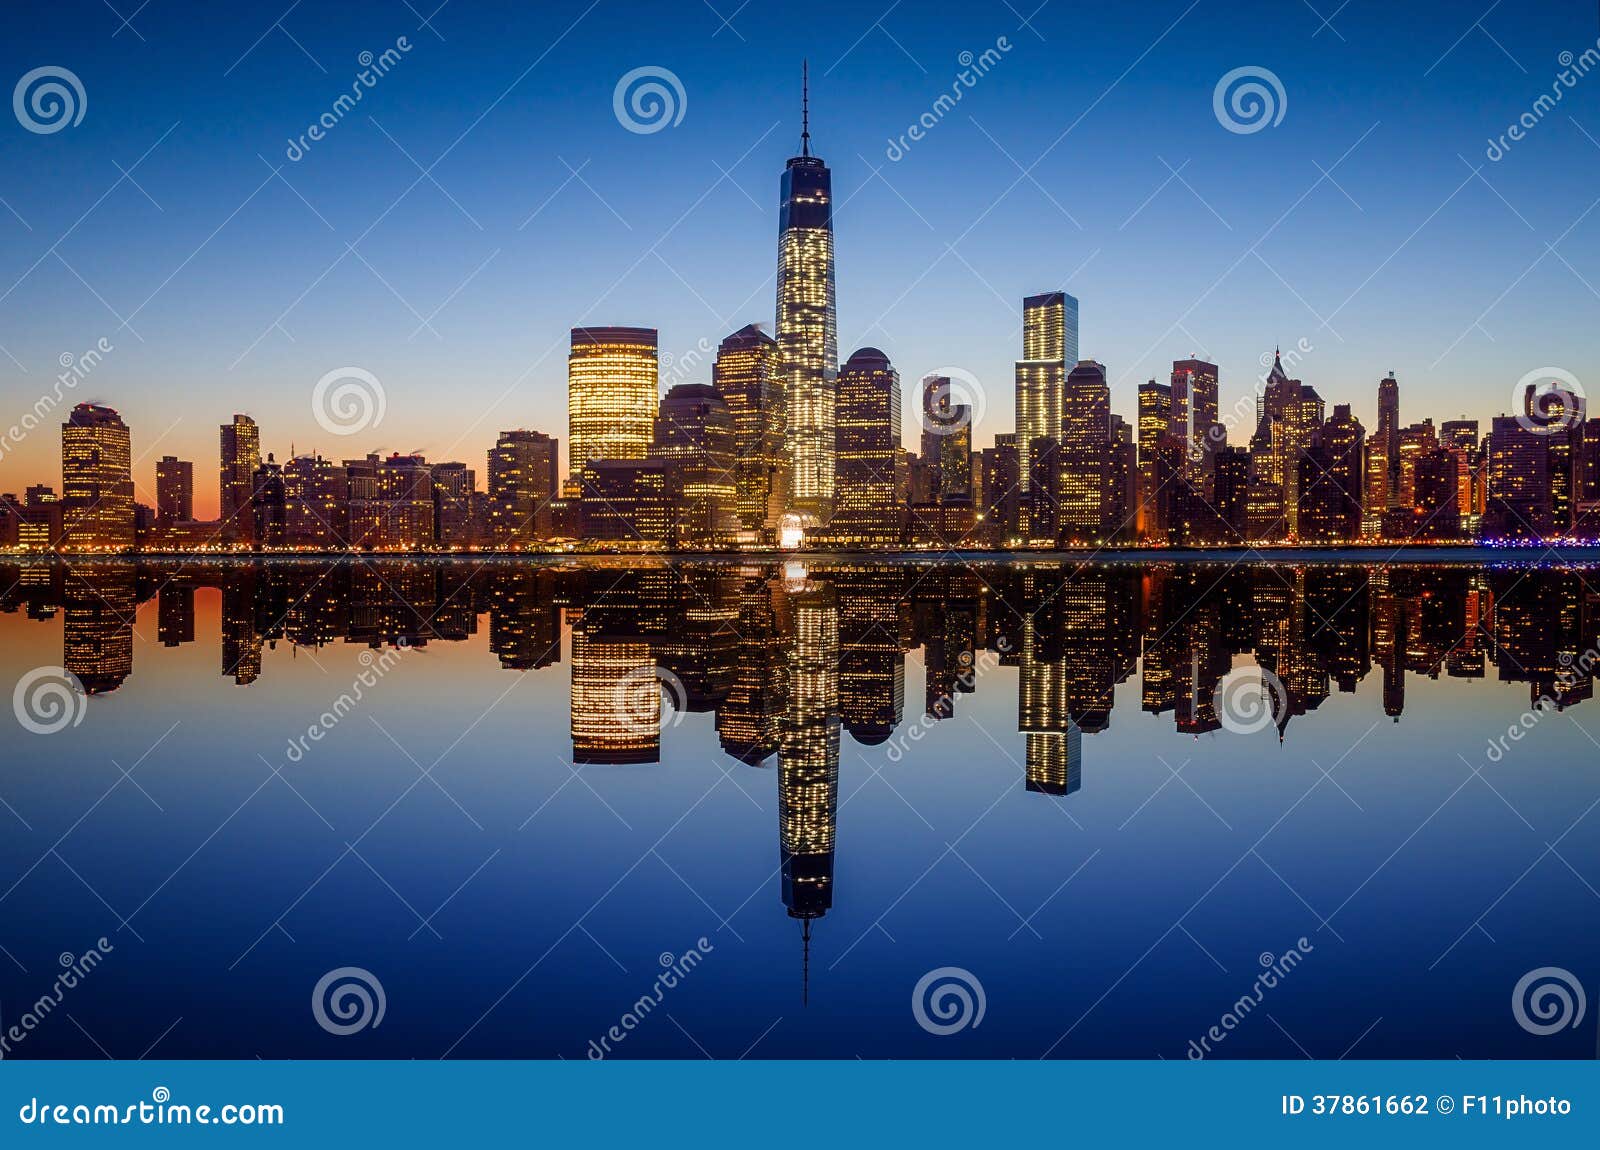 manhattan skyline with the one world trade center building at twilight